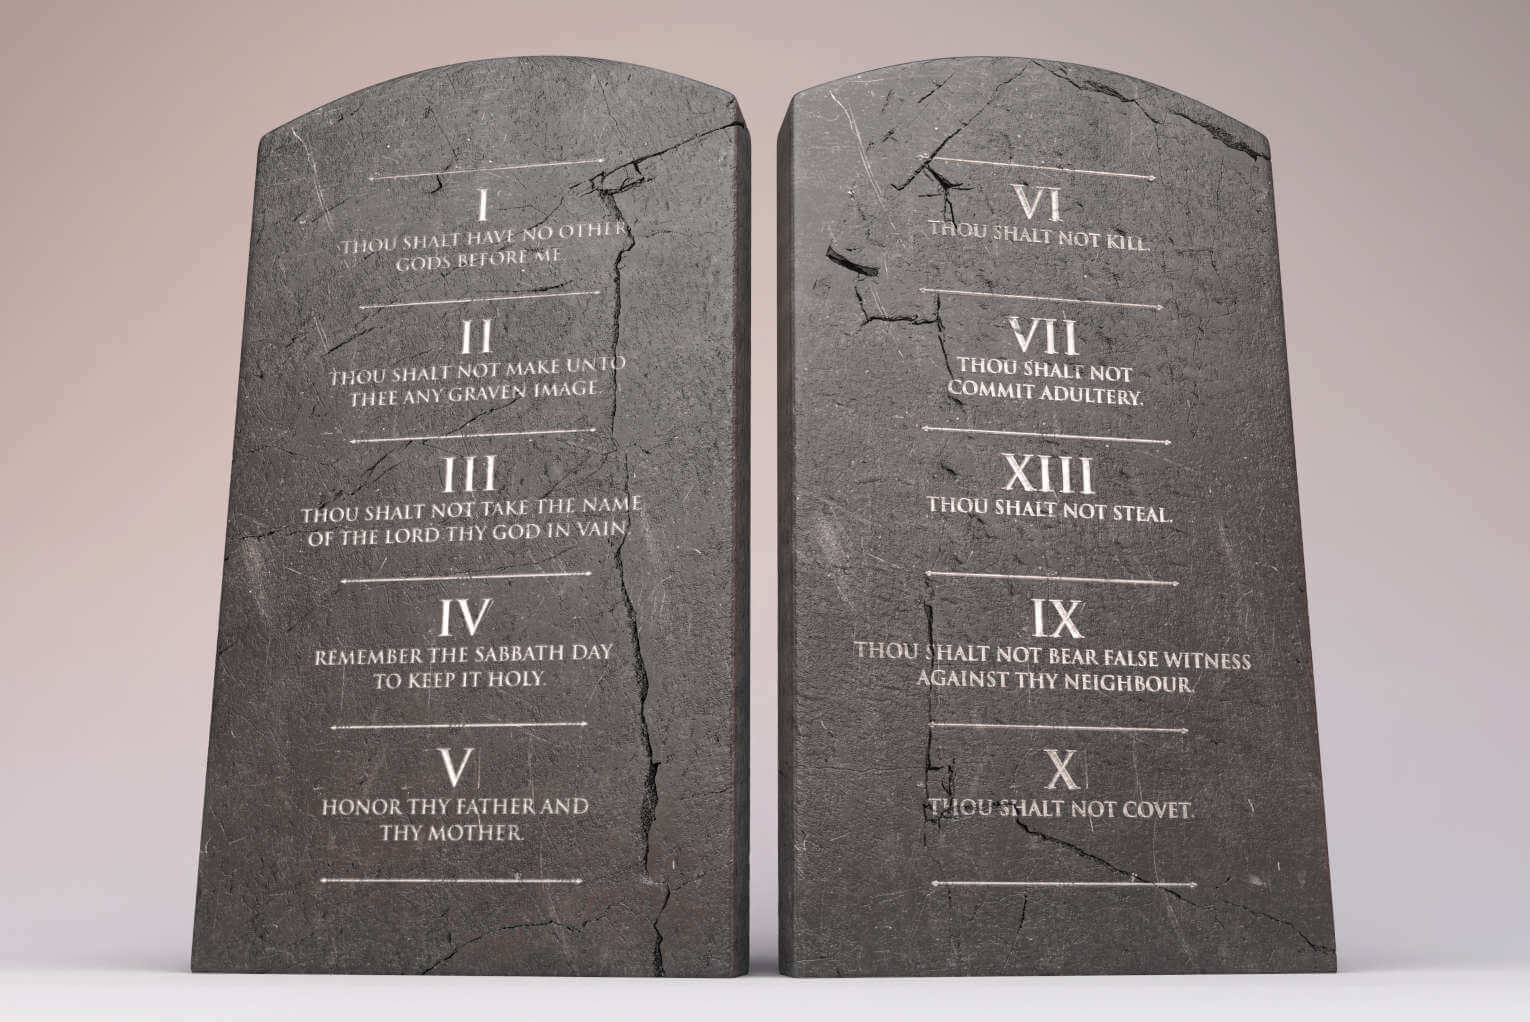 Is There a Revival of the Ten Commandments in Schools?